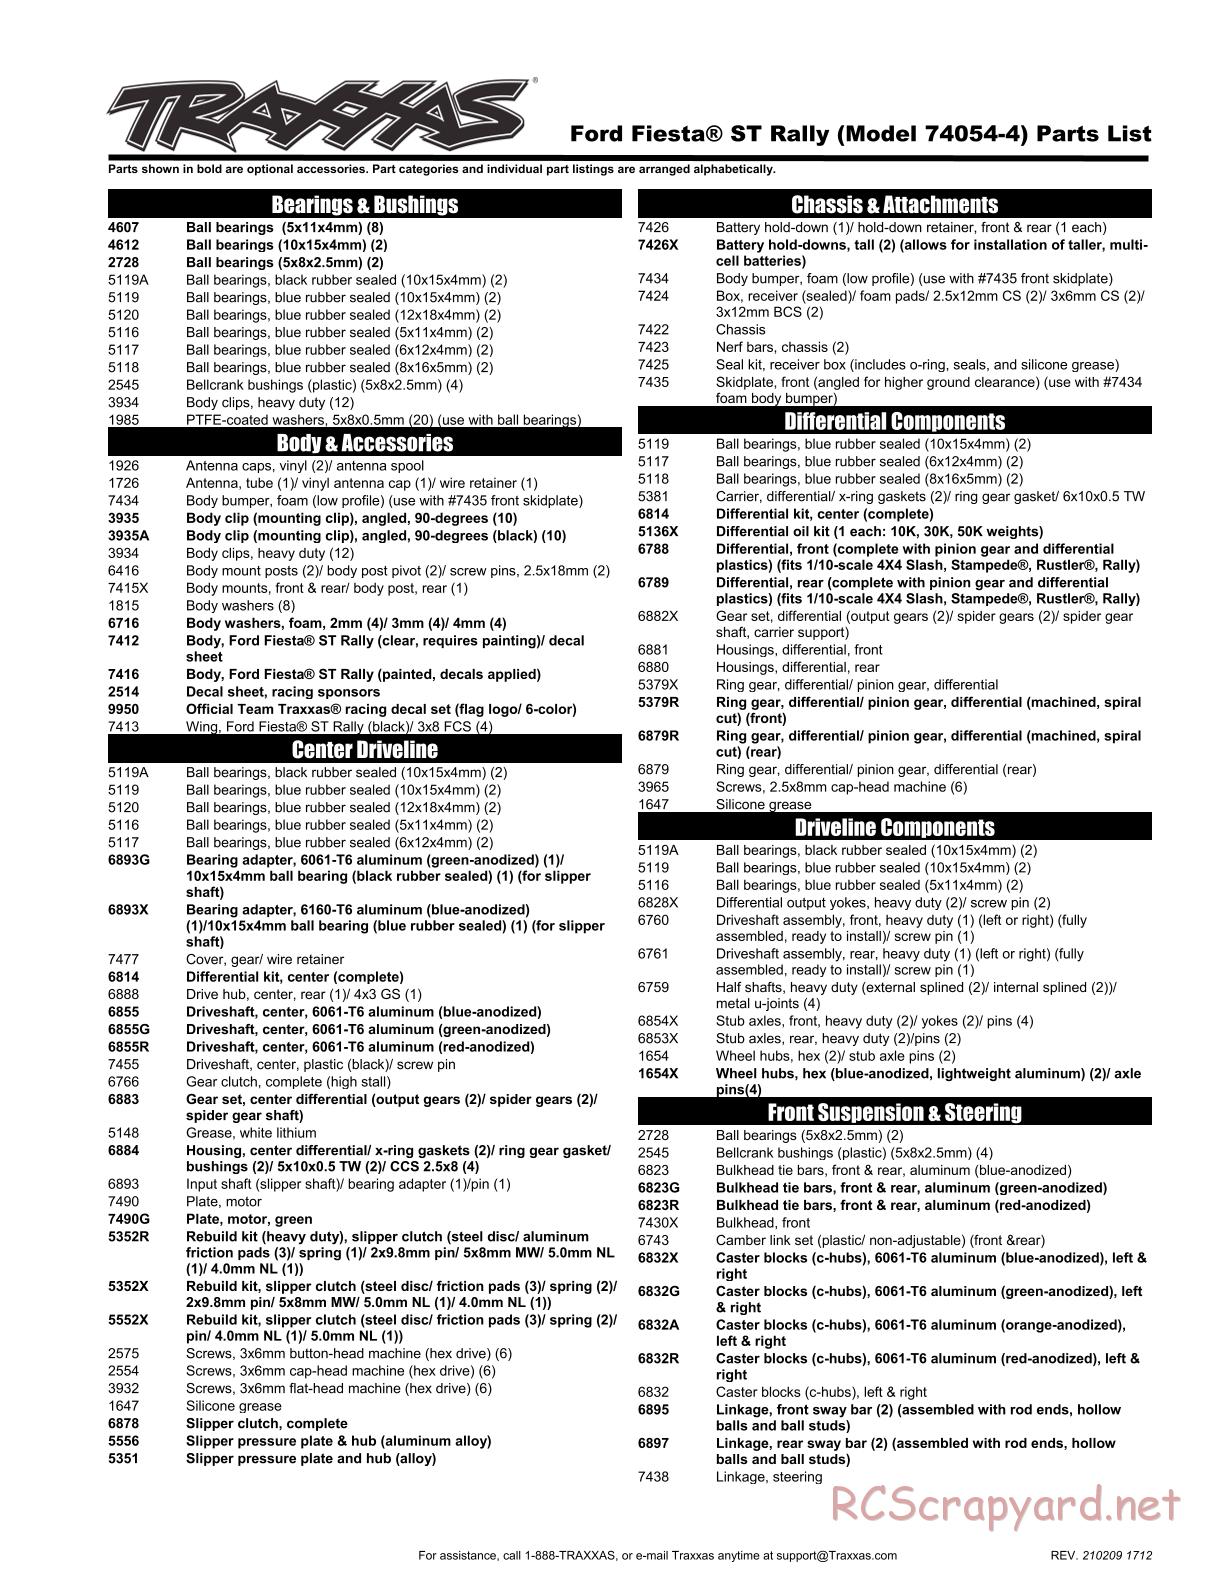 Traxxas - Ford Fiesta ST Rally - Parts List - Page 1